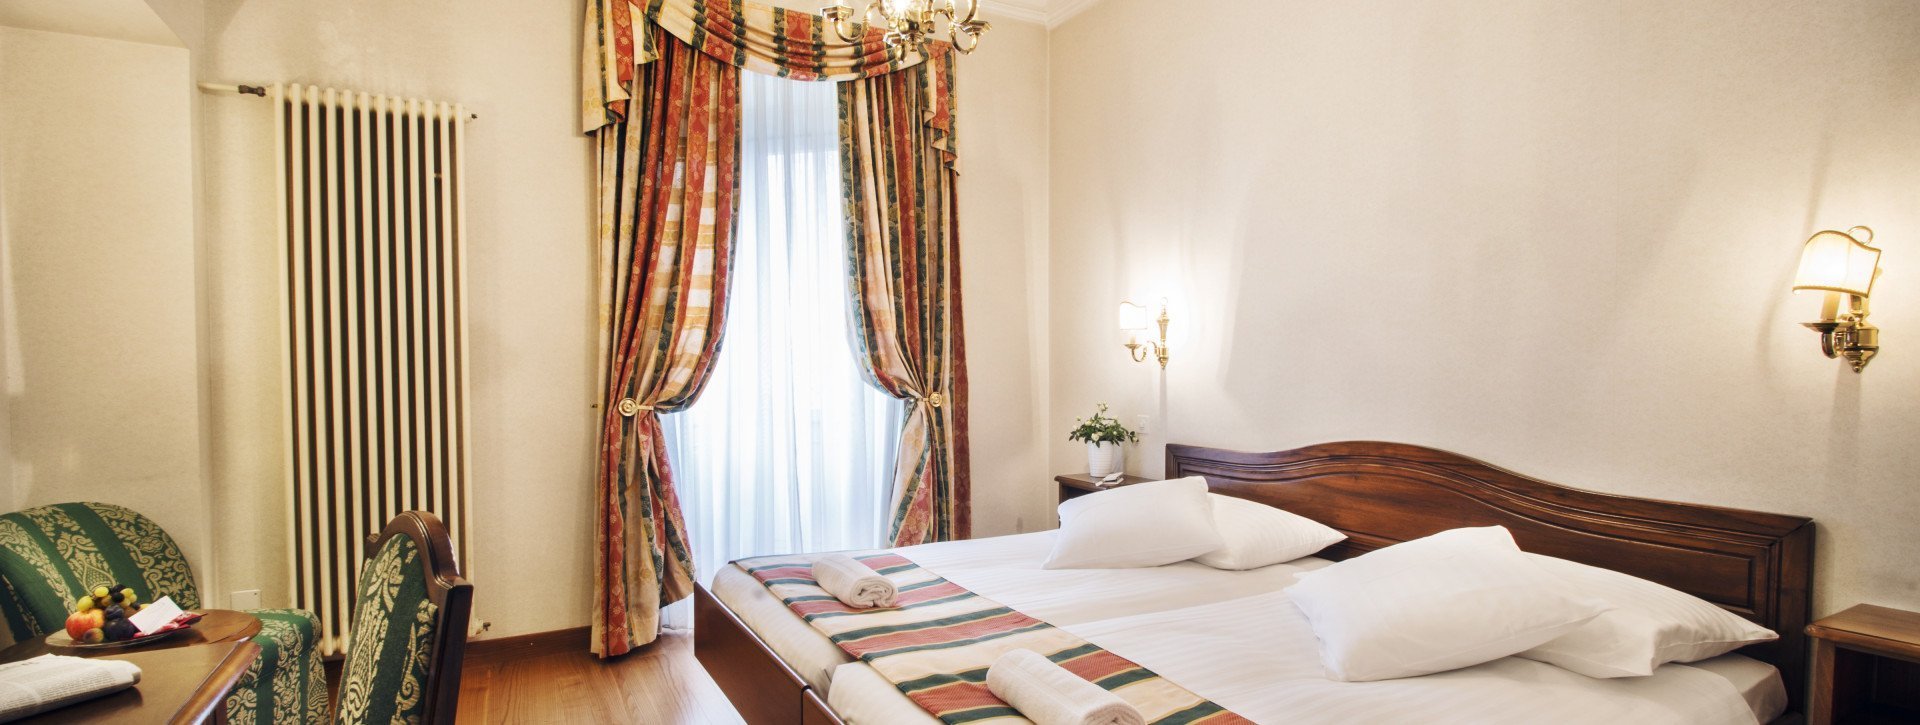 Double Classic room in the International au Lac Historic Lakeside Hotel